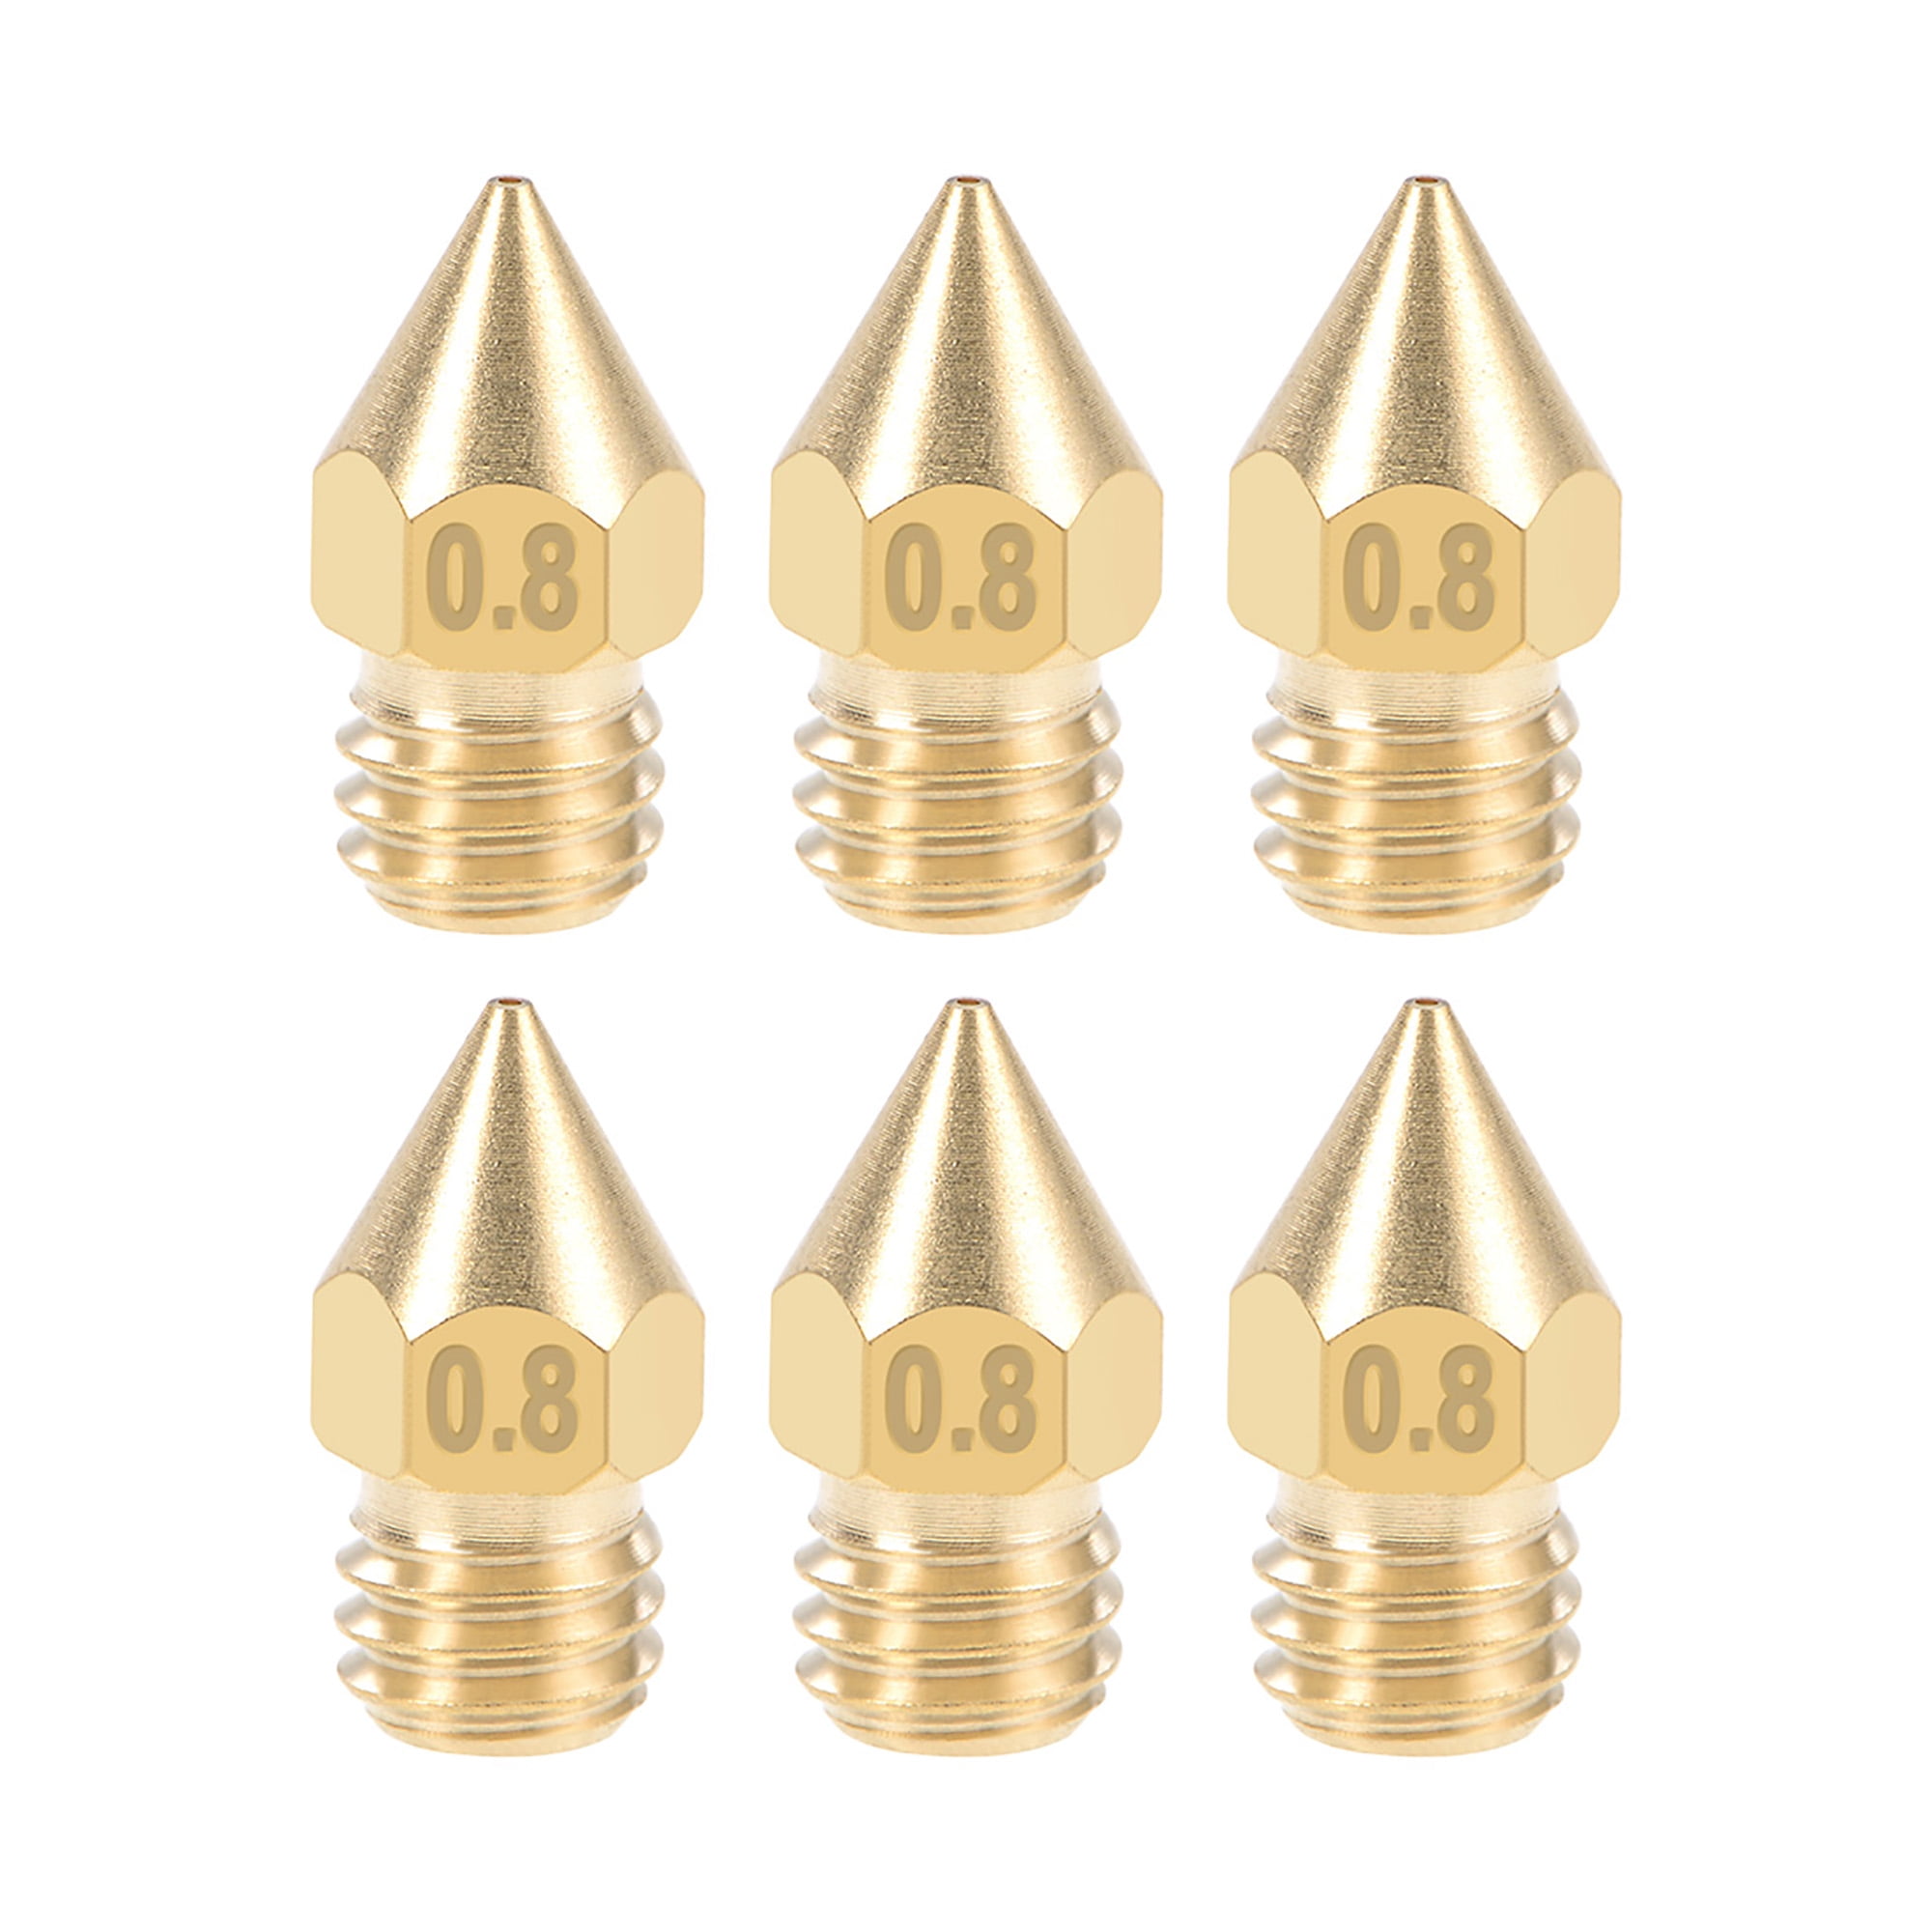 uxcell 0.2mm 3D Printer Nozzle Head M6 Thread Replacement for MK8 1.75mm Extruder Print Stainless Steel 2pcs 